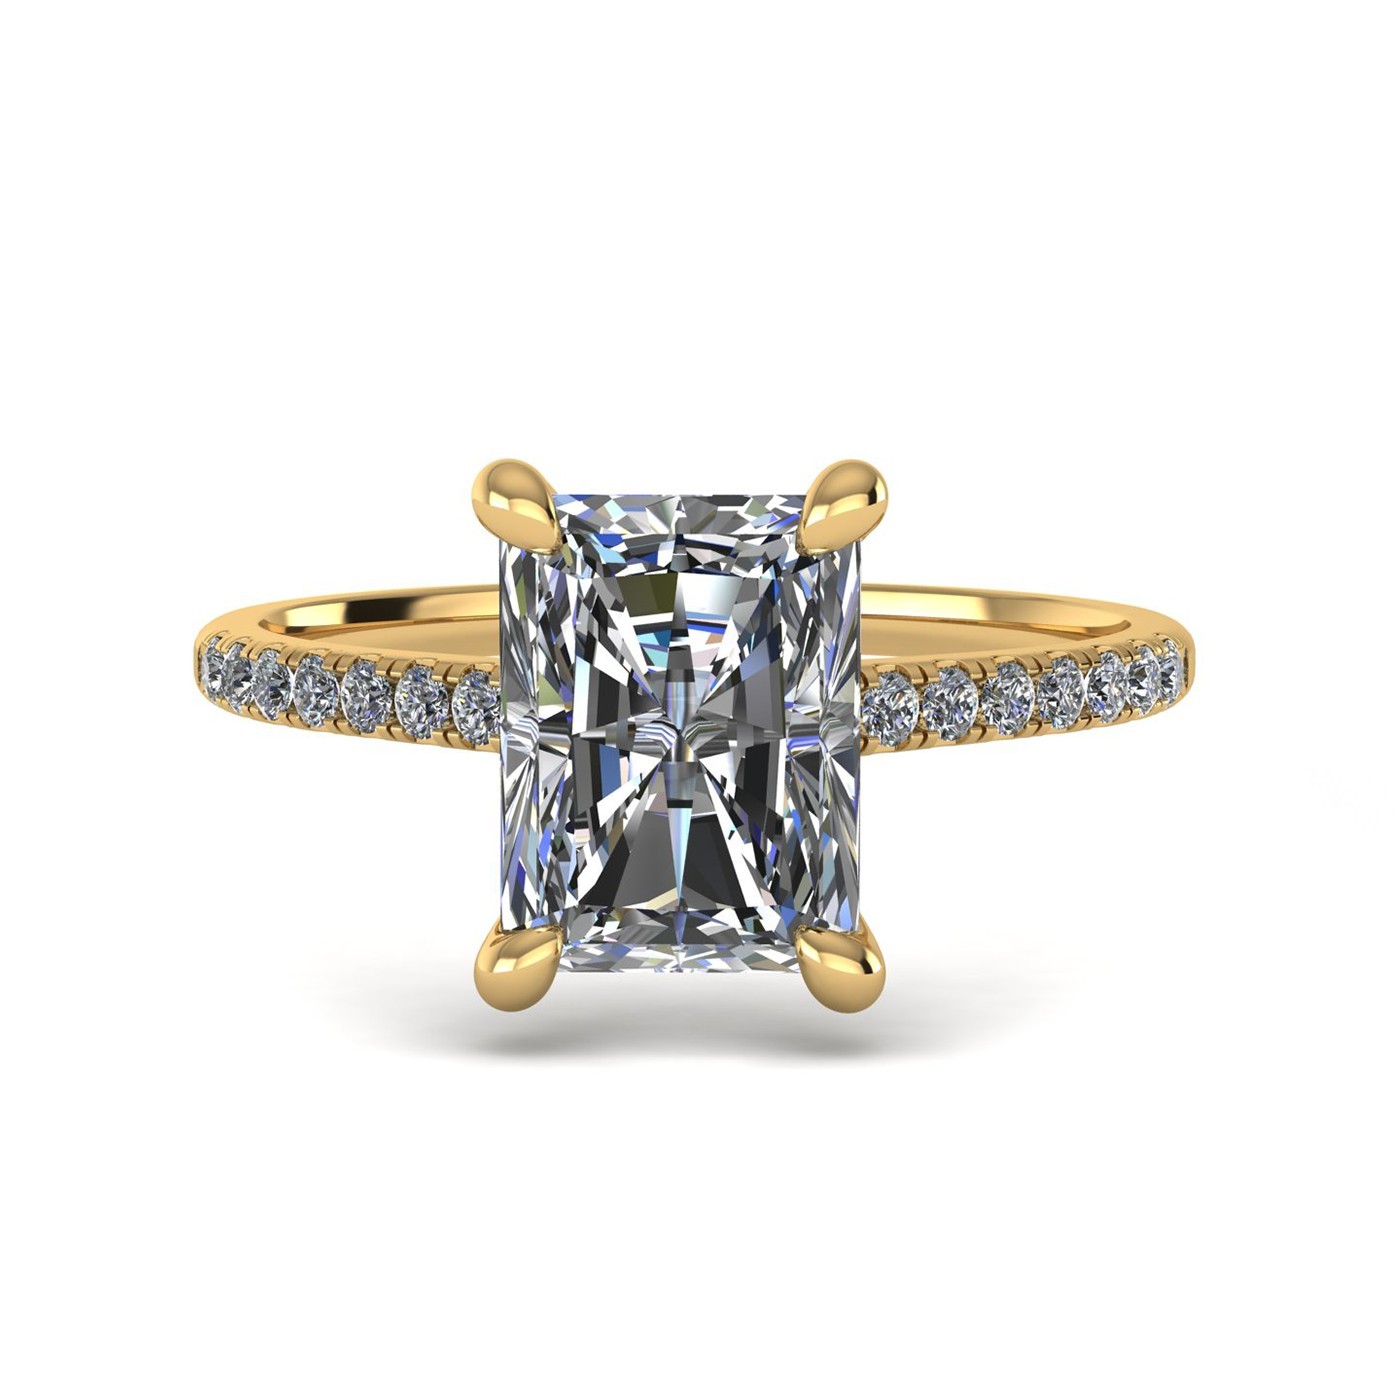 18k yellow gold  0,80 ct 4 prongs radiant cut diamond engagement ring with whisper thin pavÉ set band Photos & images